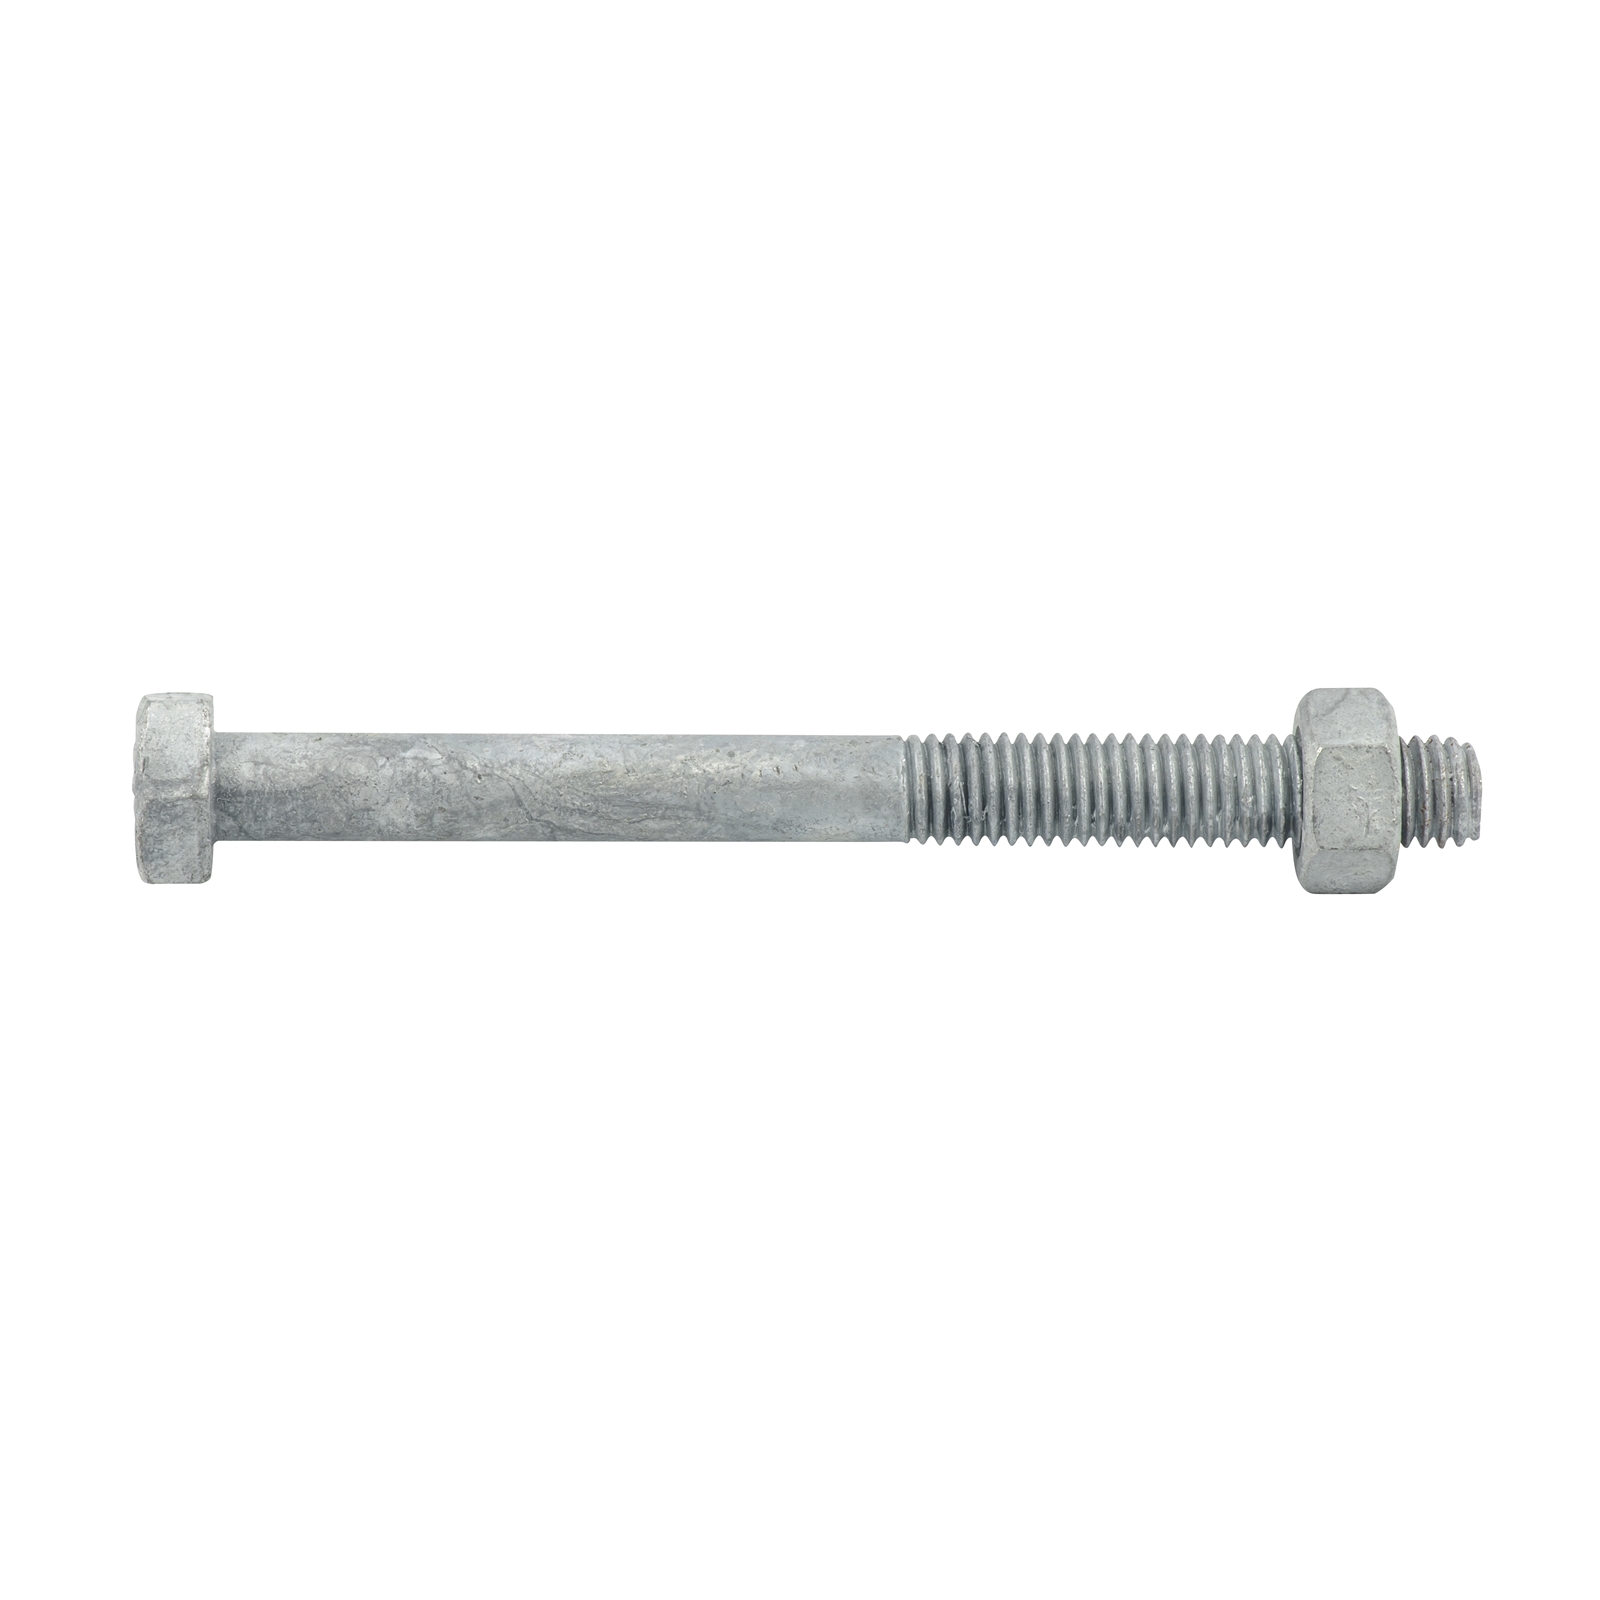 Zenith M8 x 90mm Galvanised Hex Head Bolt and Nut